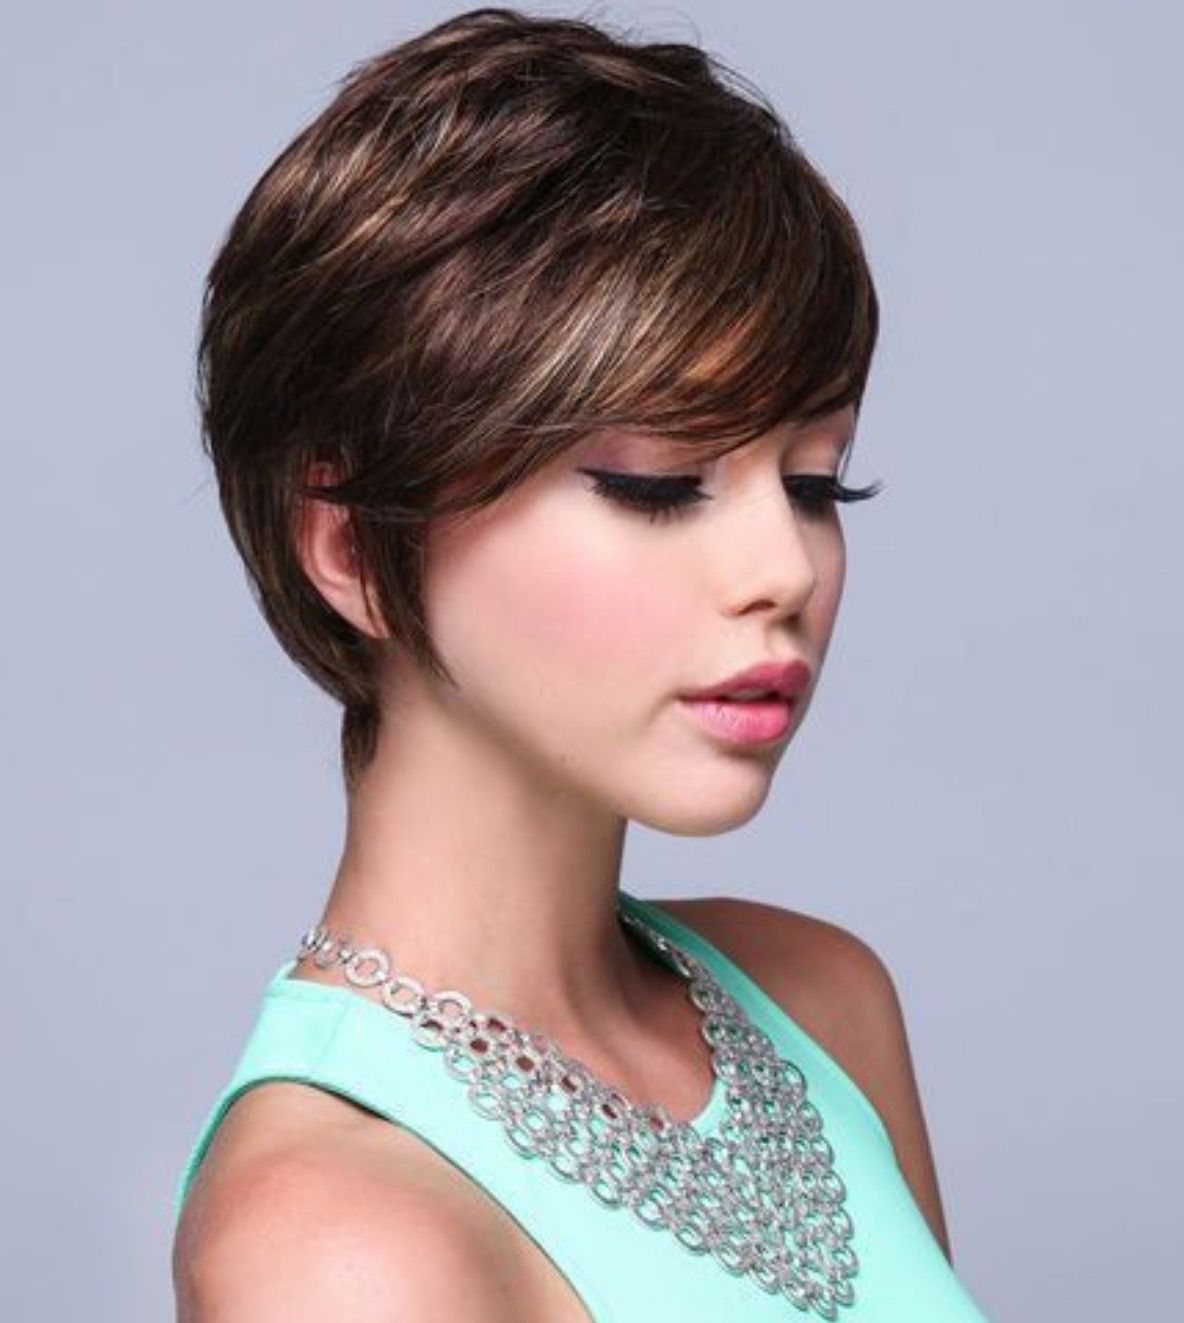 Very Cute Long Pixie Cut | Things That Catch My Eye | Pinterest For Most Current Cute Short Pixie Hairstyles (View 12 of 15)